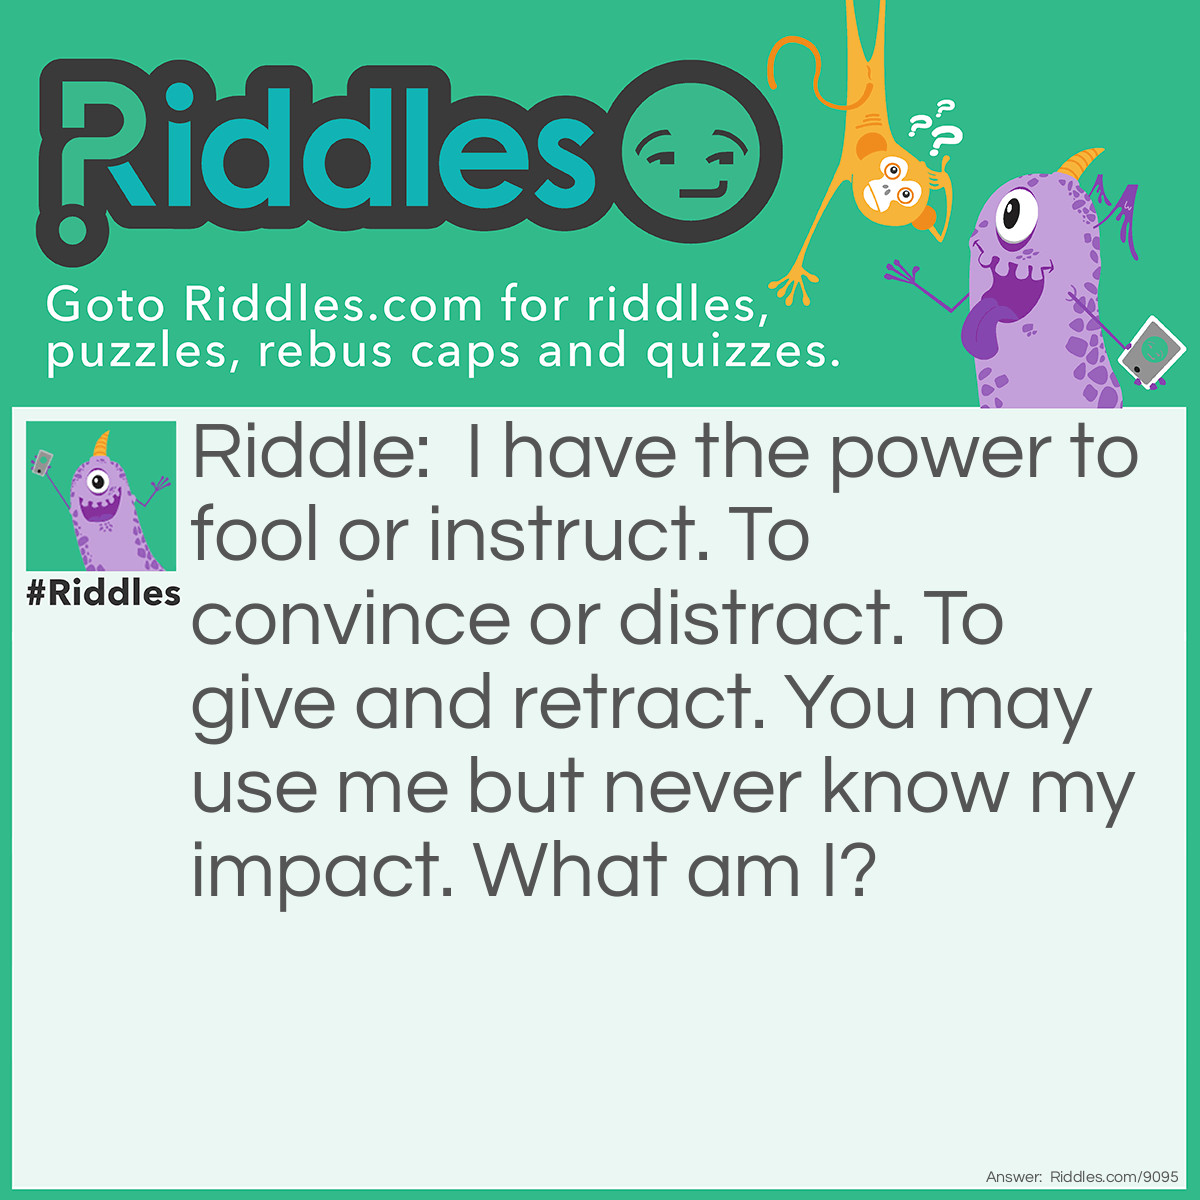 Riddle: I have the power to fool or instruct. To convince or distract. To give and retract. You may use me but never know my impact. What am I? Answer: Words.